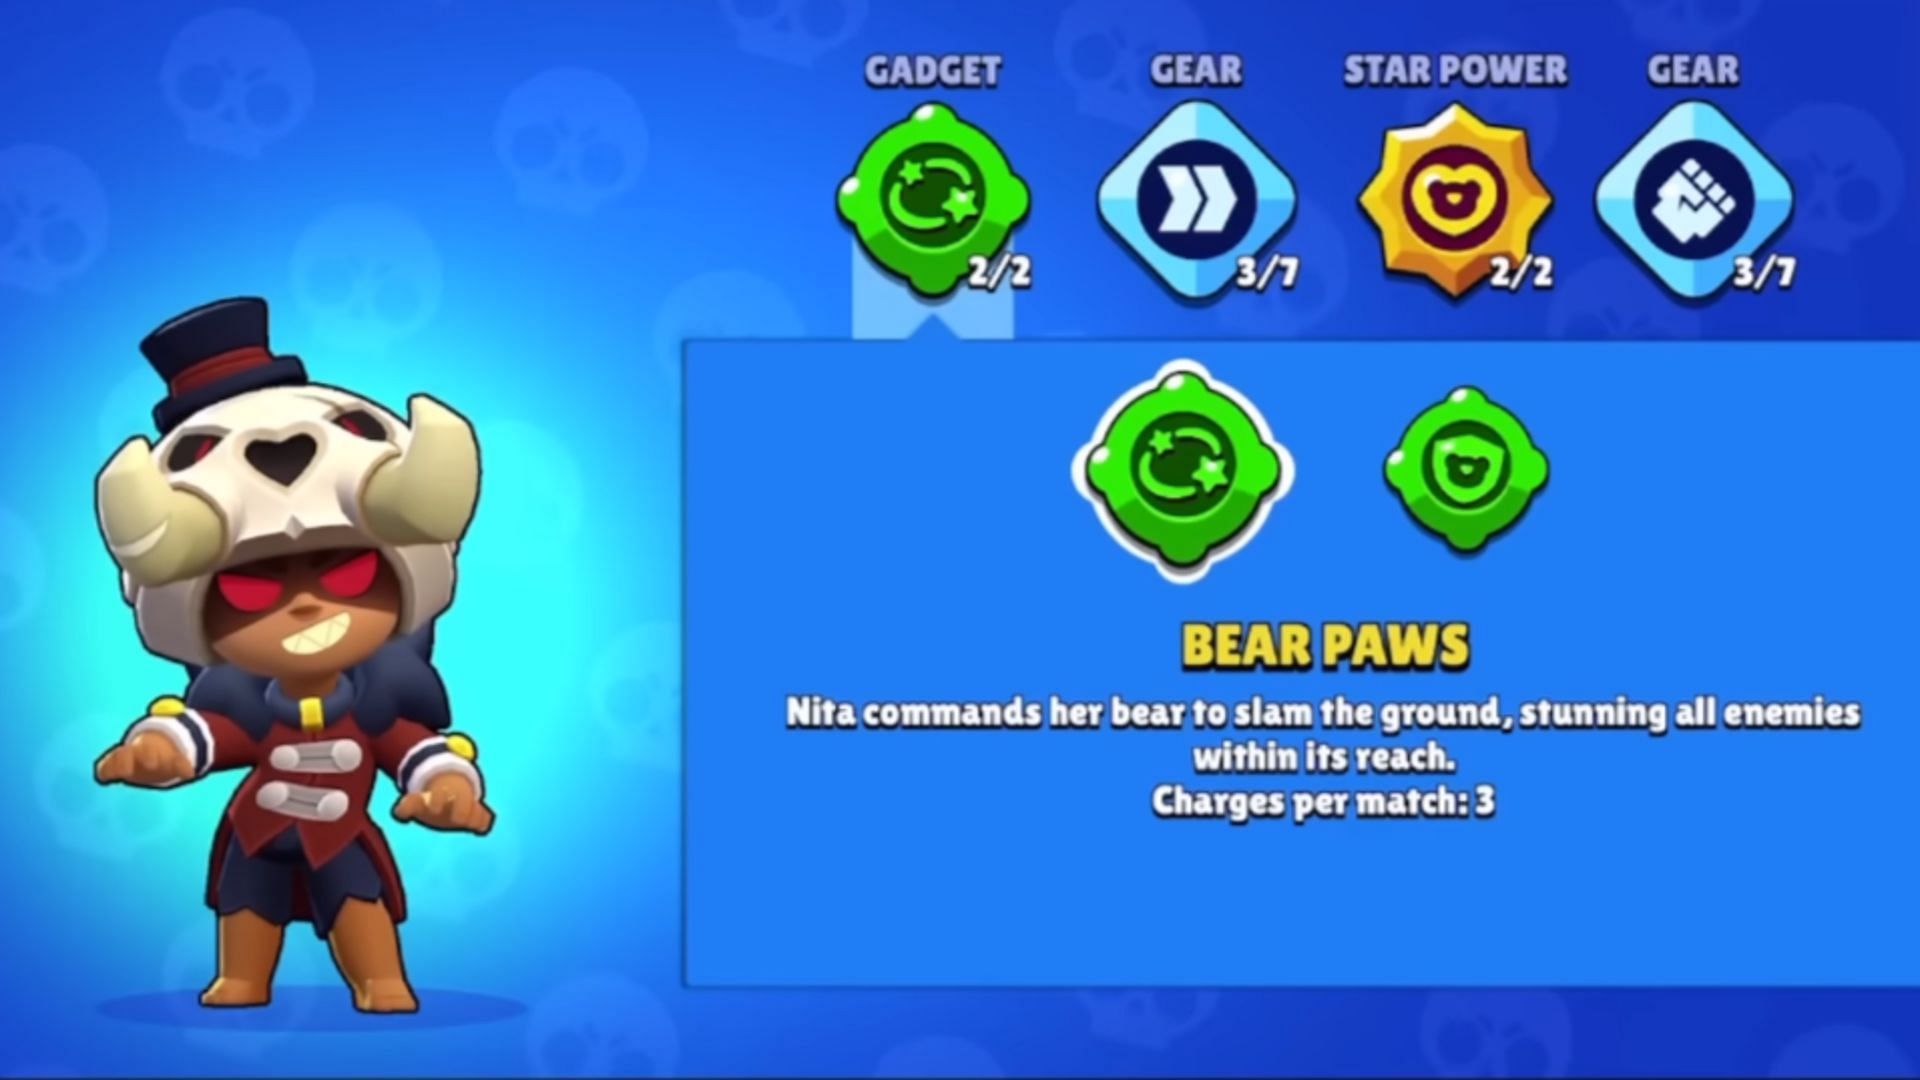 Bear Paws Gadget (Image via Supercell)